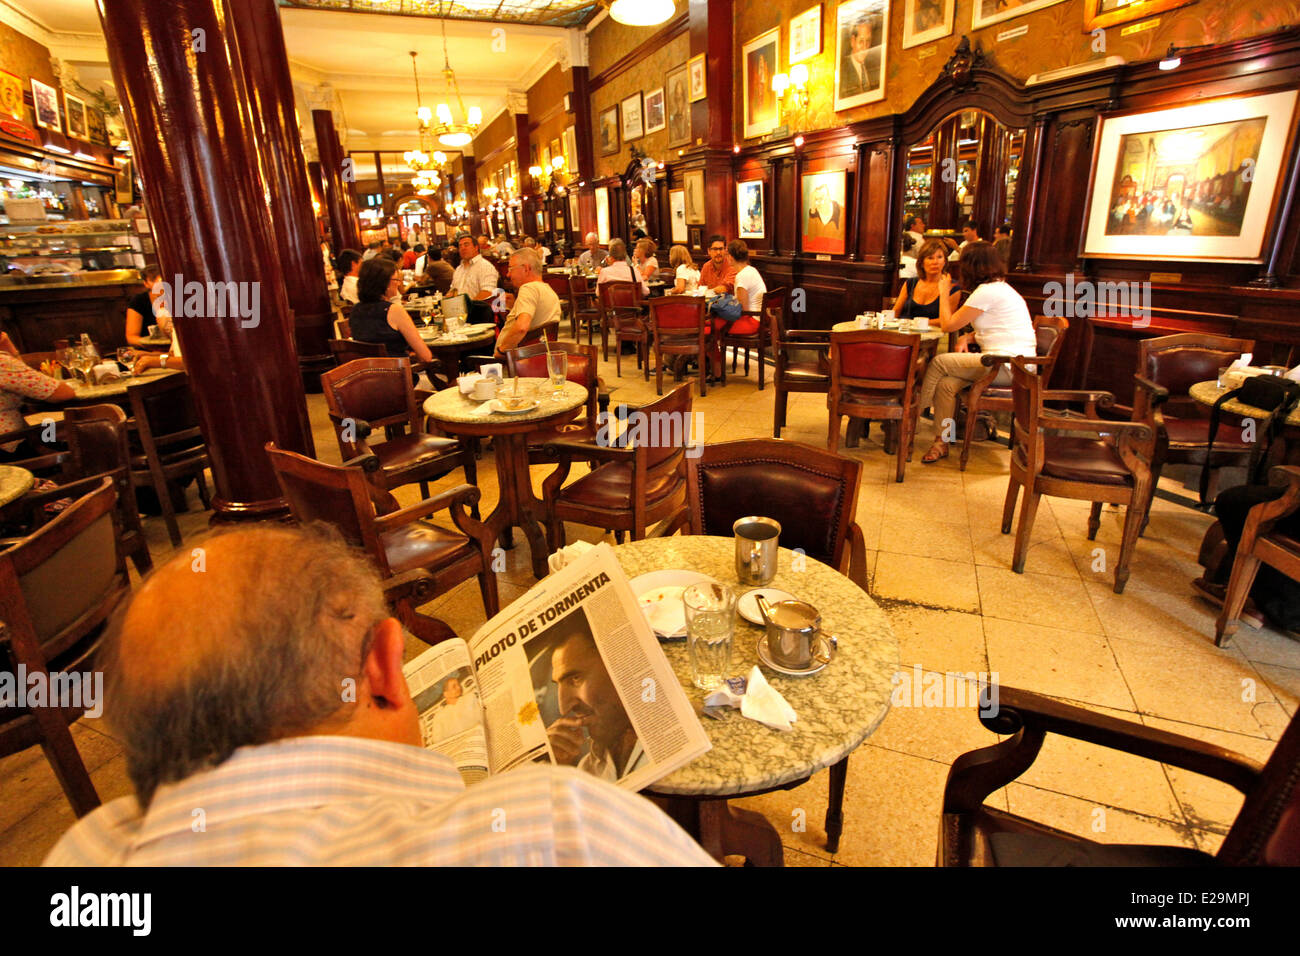 Argentina, Buenos Aires, Microcentro District, Cafe Tortoni Stock Photo